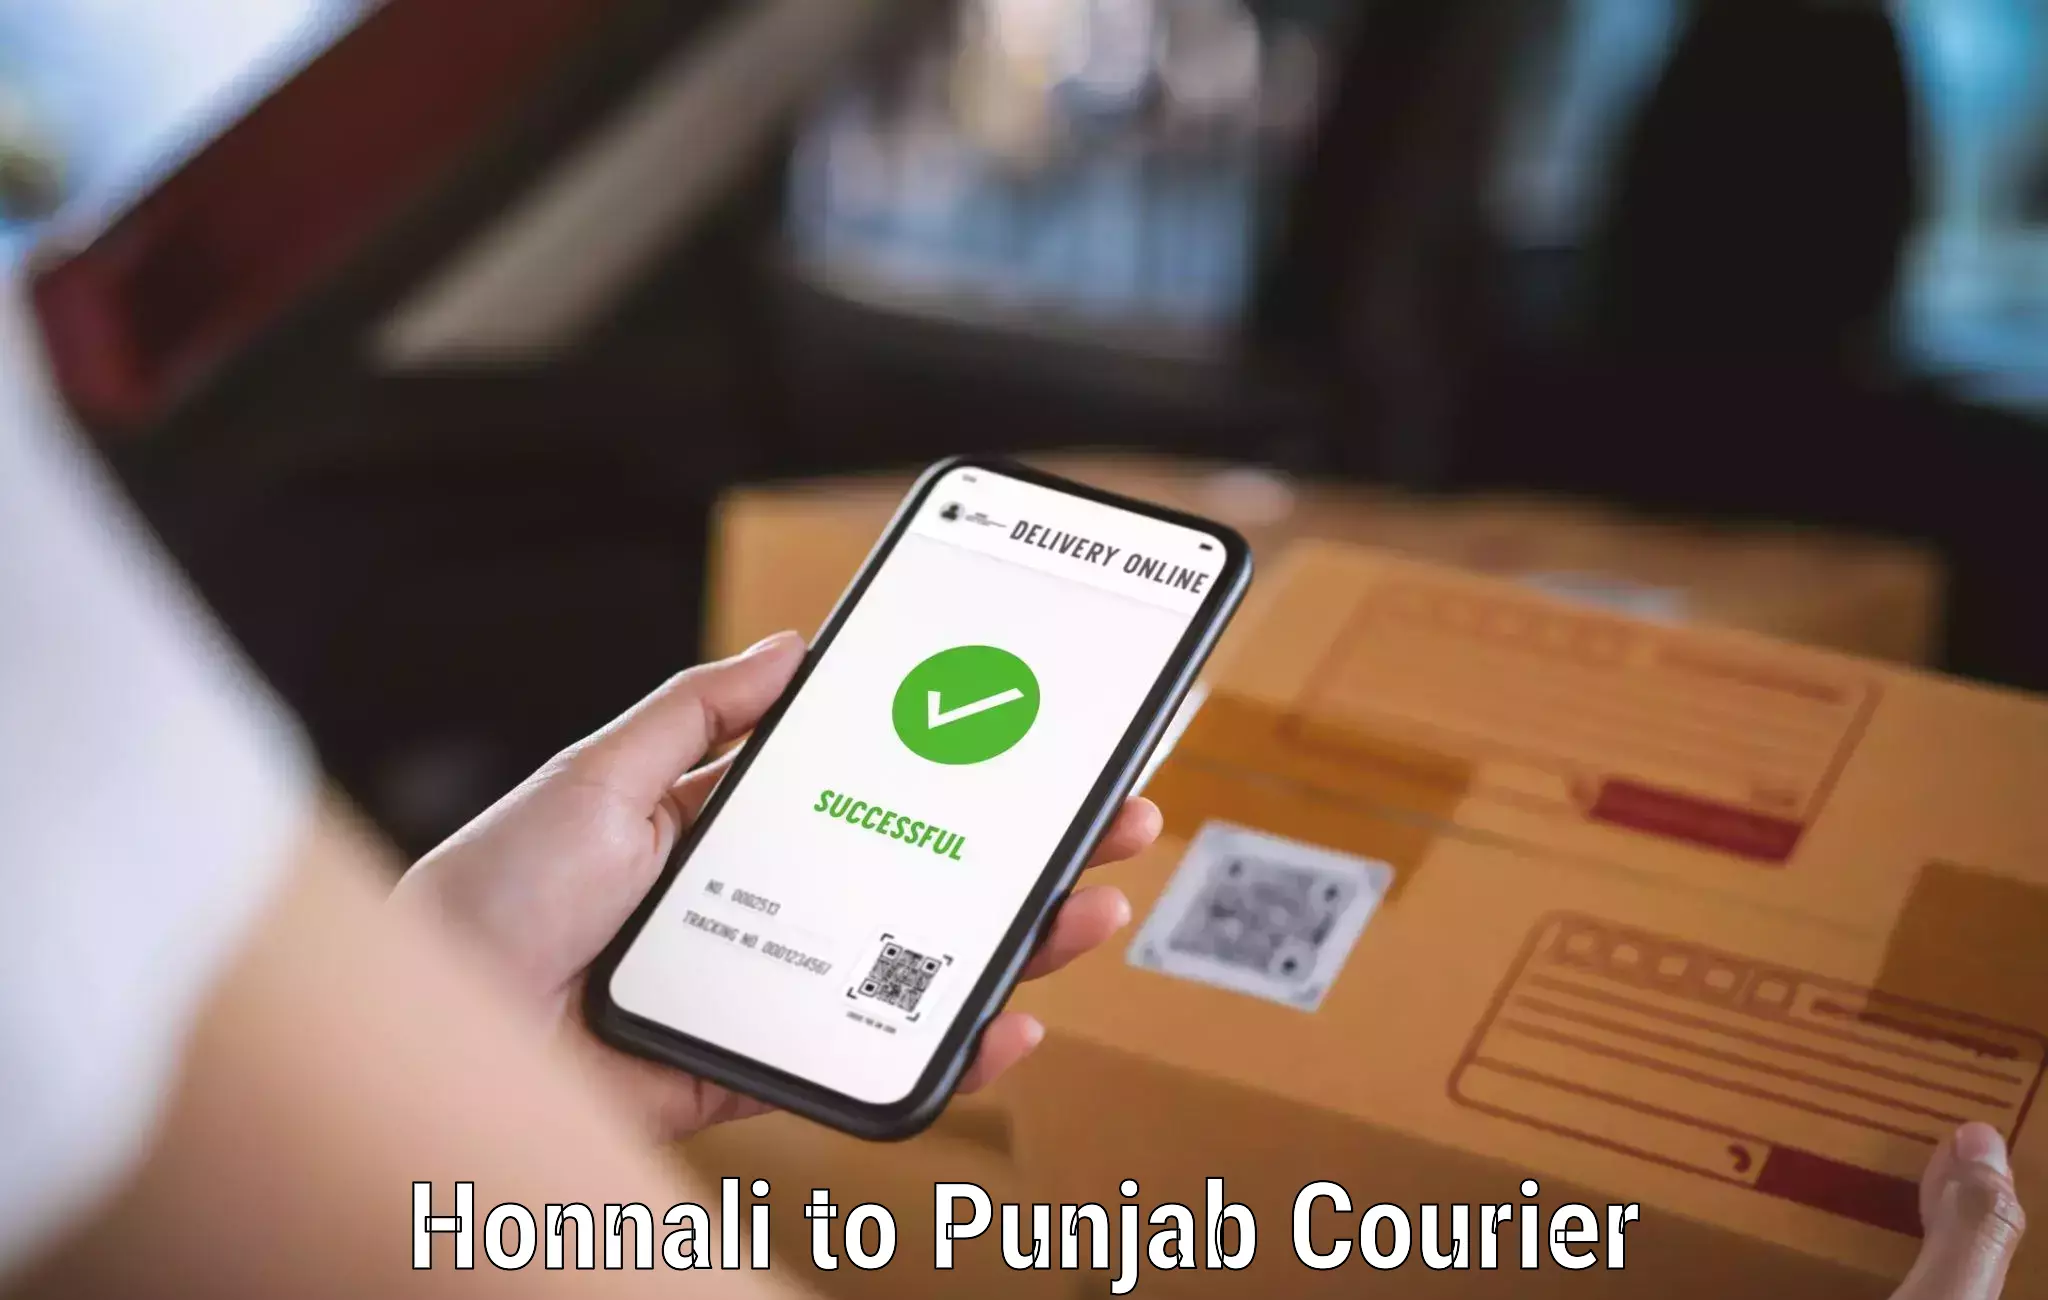 Courier service booking Honnali to Amritsar